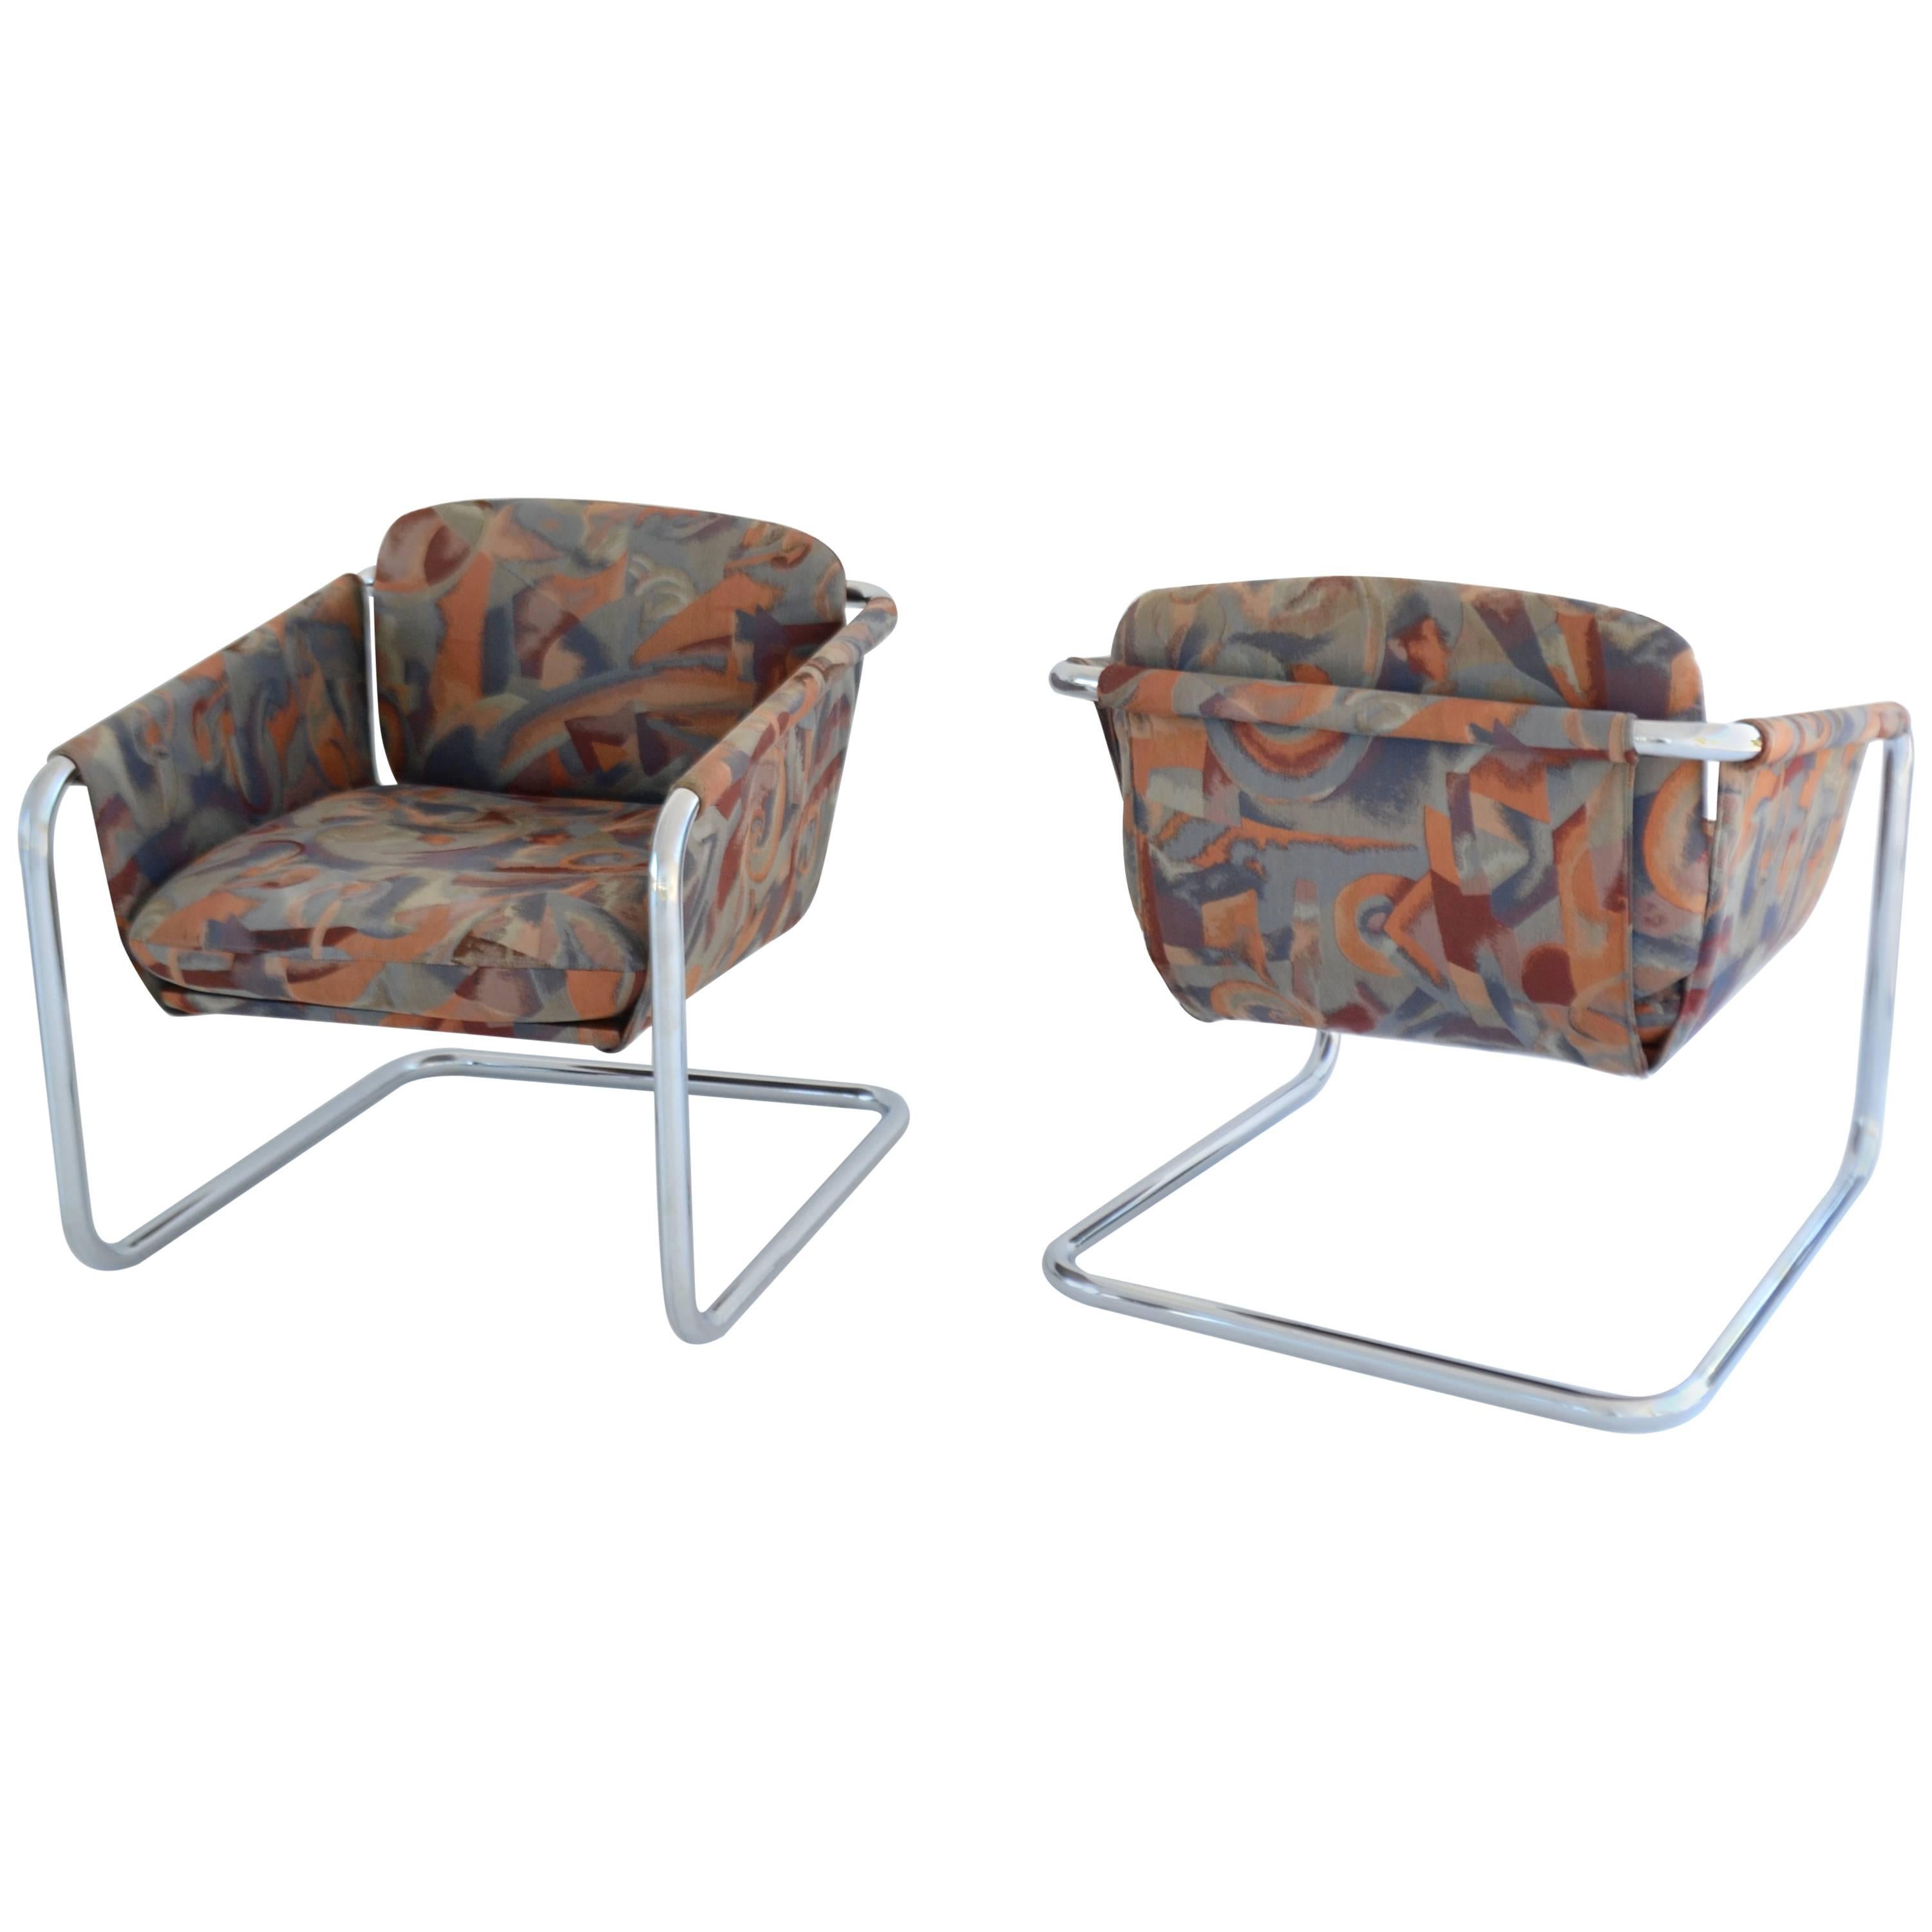 Pair of Postmodern Cantilevered Sling Form Lounge Chairs For Sale 2